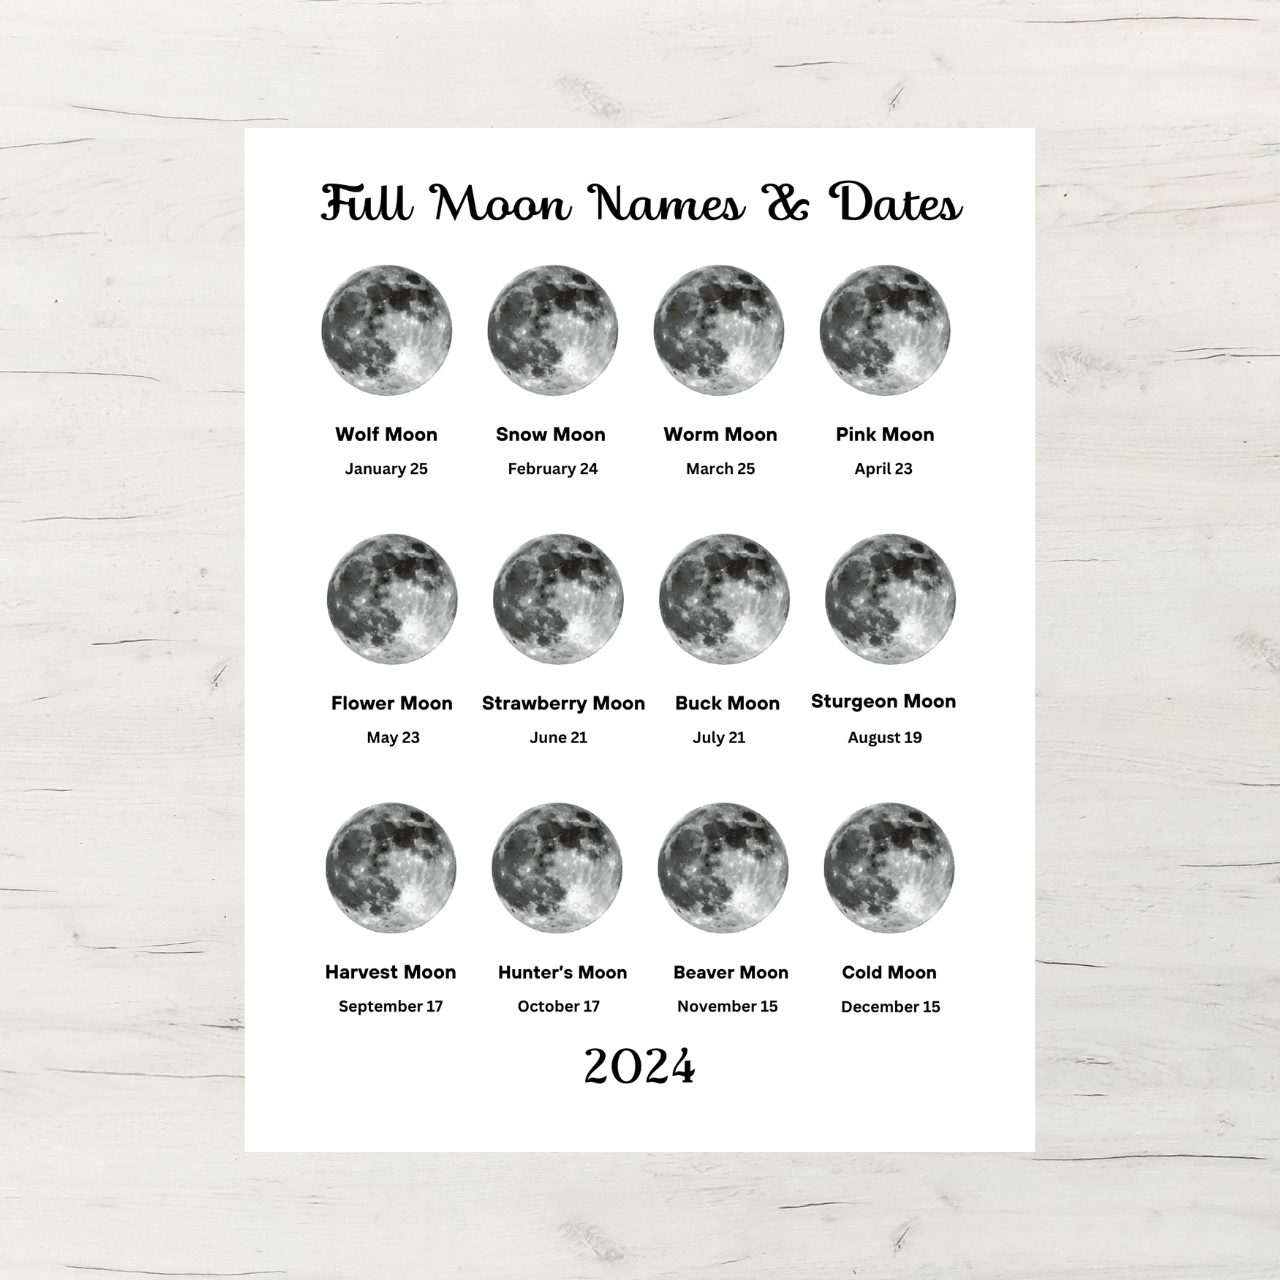 2024 Full Moon Name & Dates Heart of the Sage